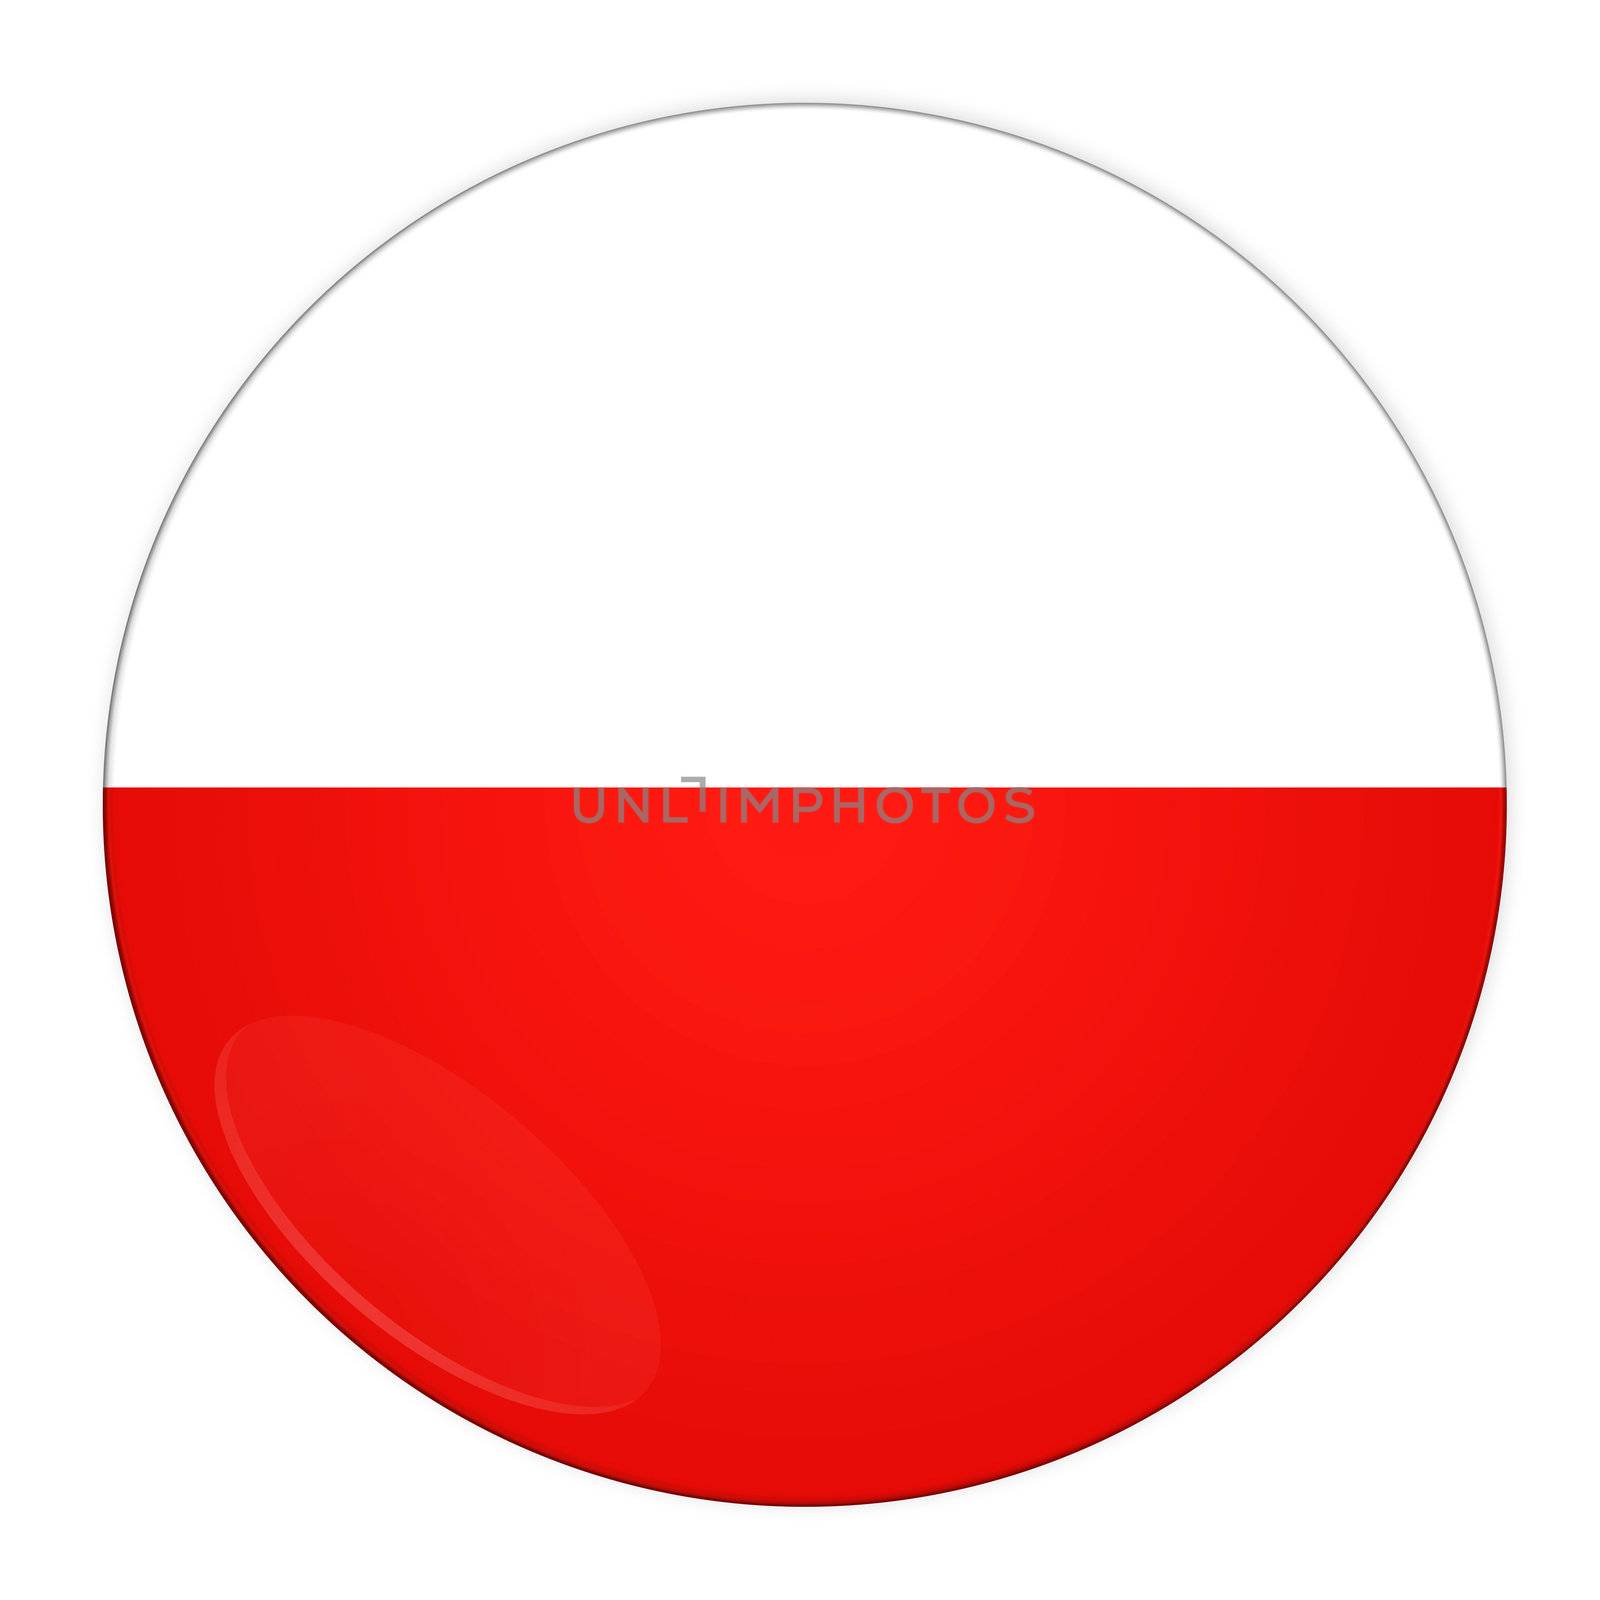 Poland button with flag by rusak